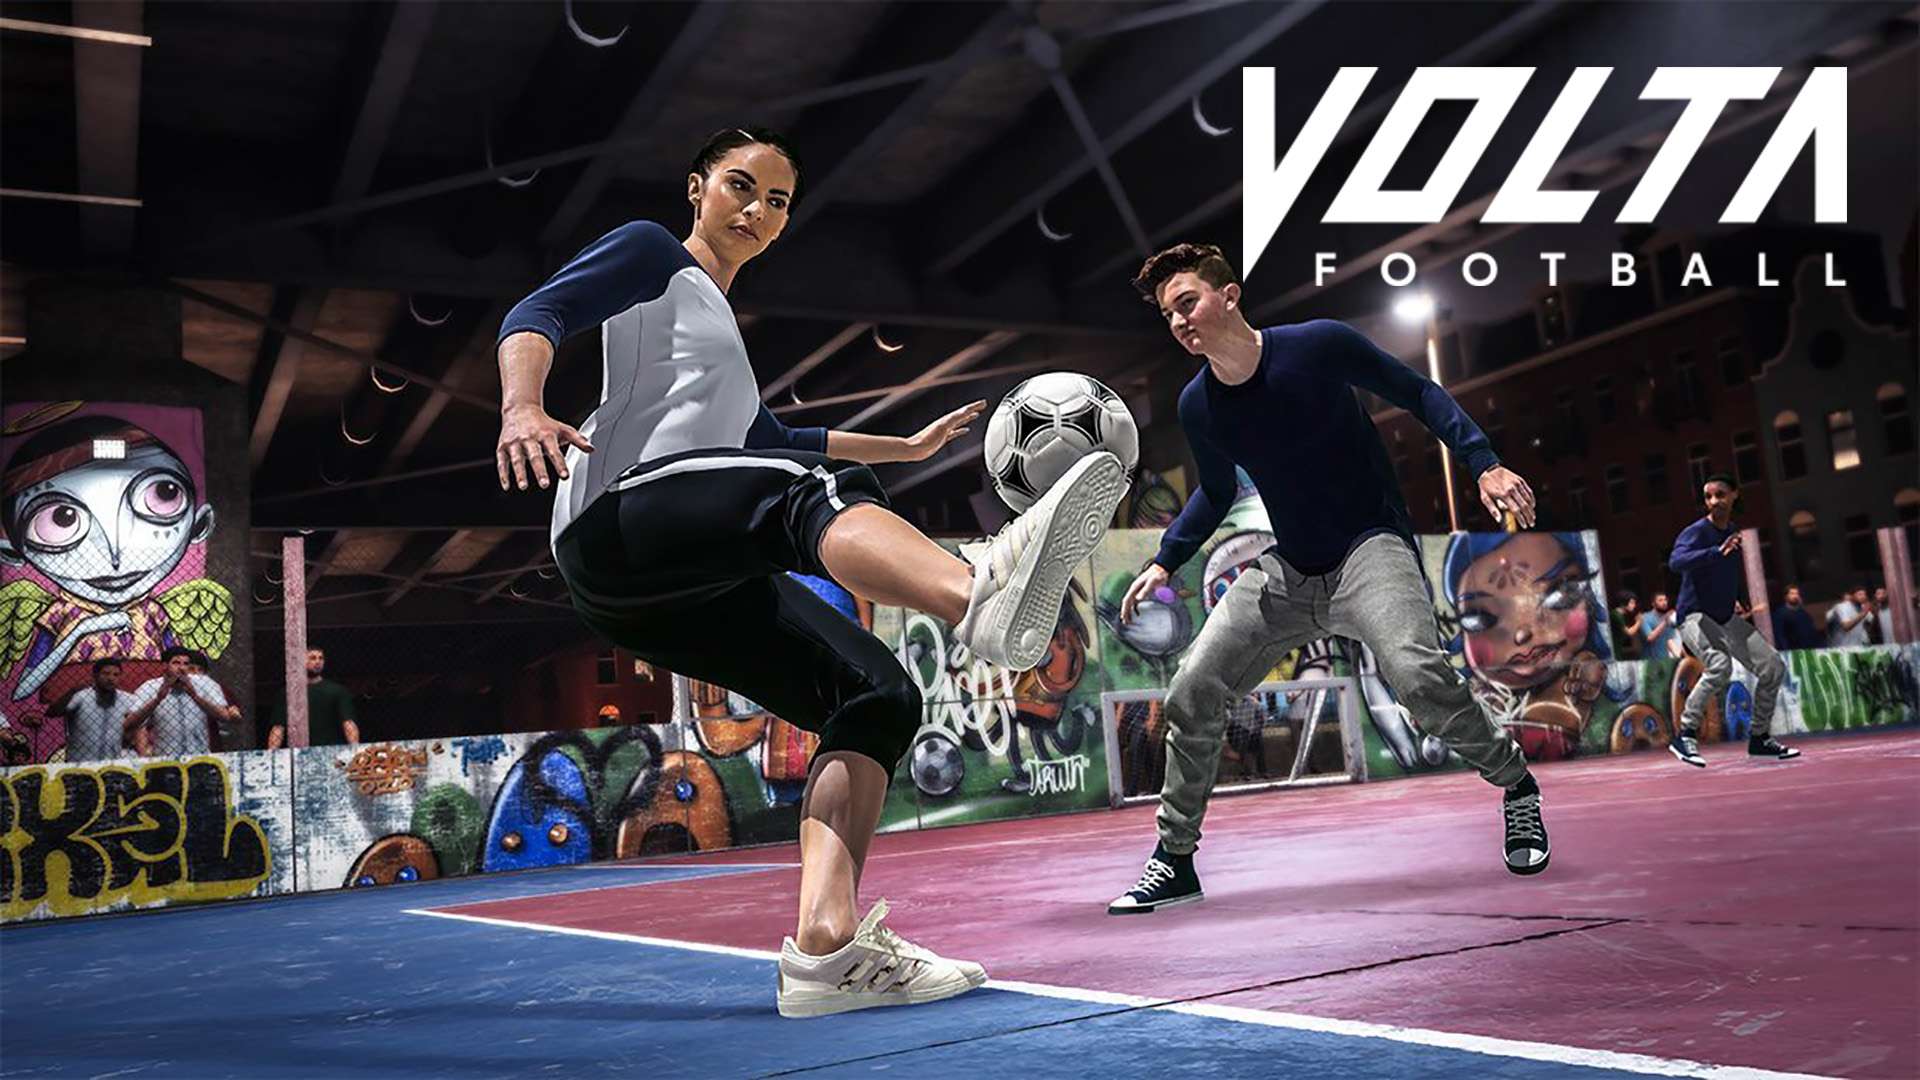 Image result for Ten things we learned playing Volta in FIFA 20